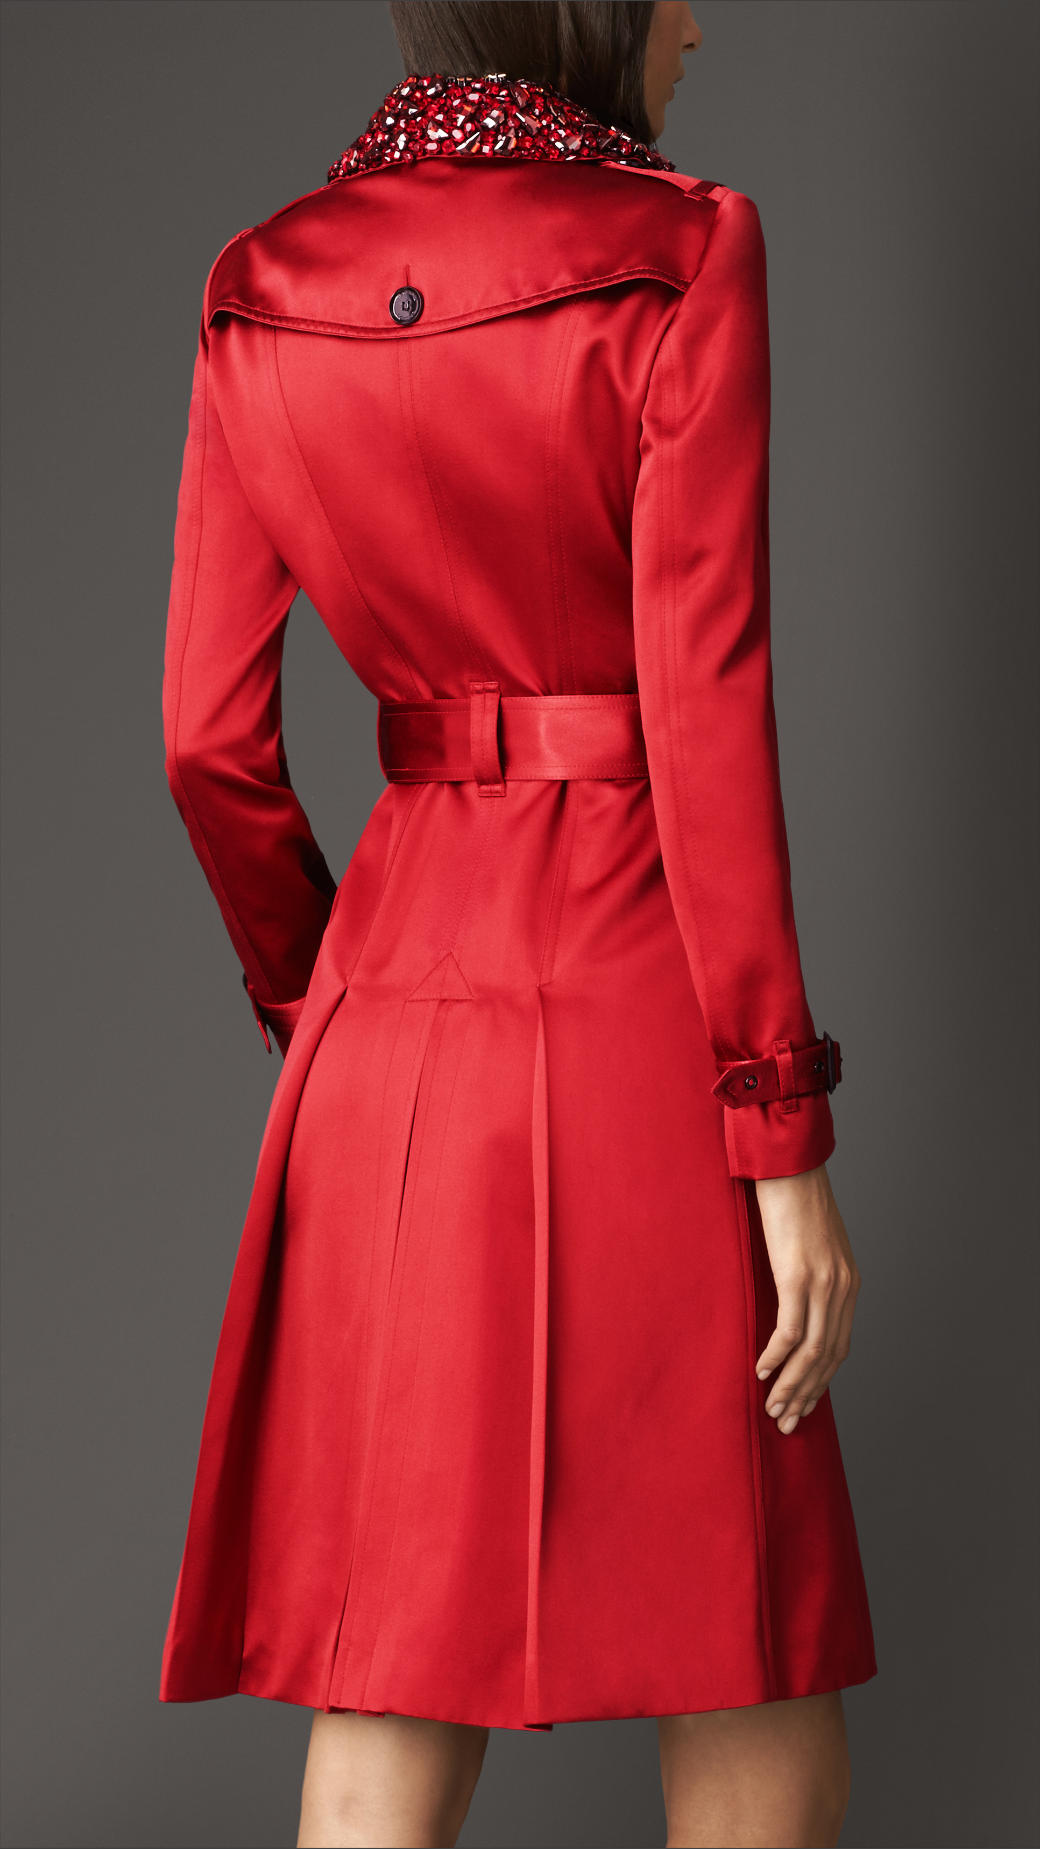 Burberry Long Gem Collar Satin Trench Coat in Red - Lyst